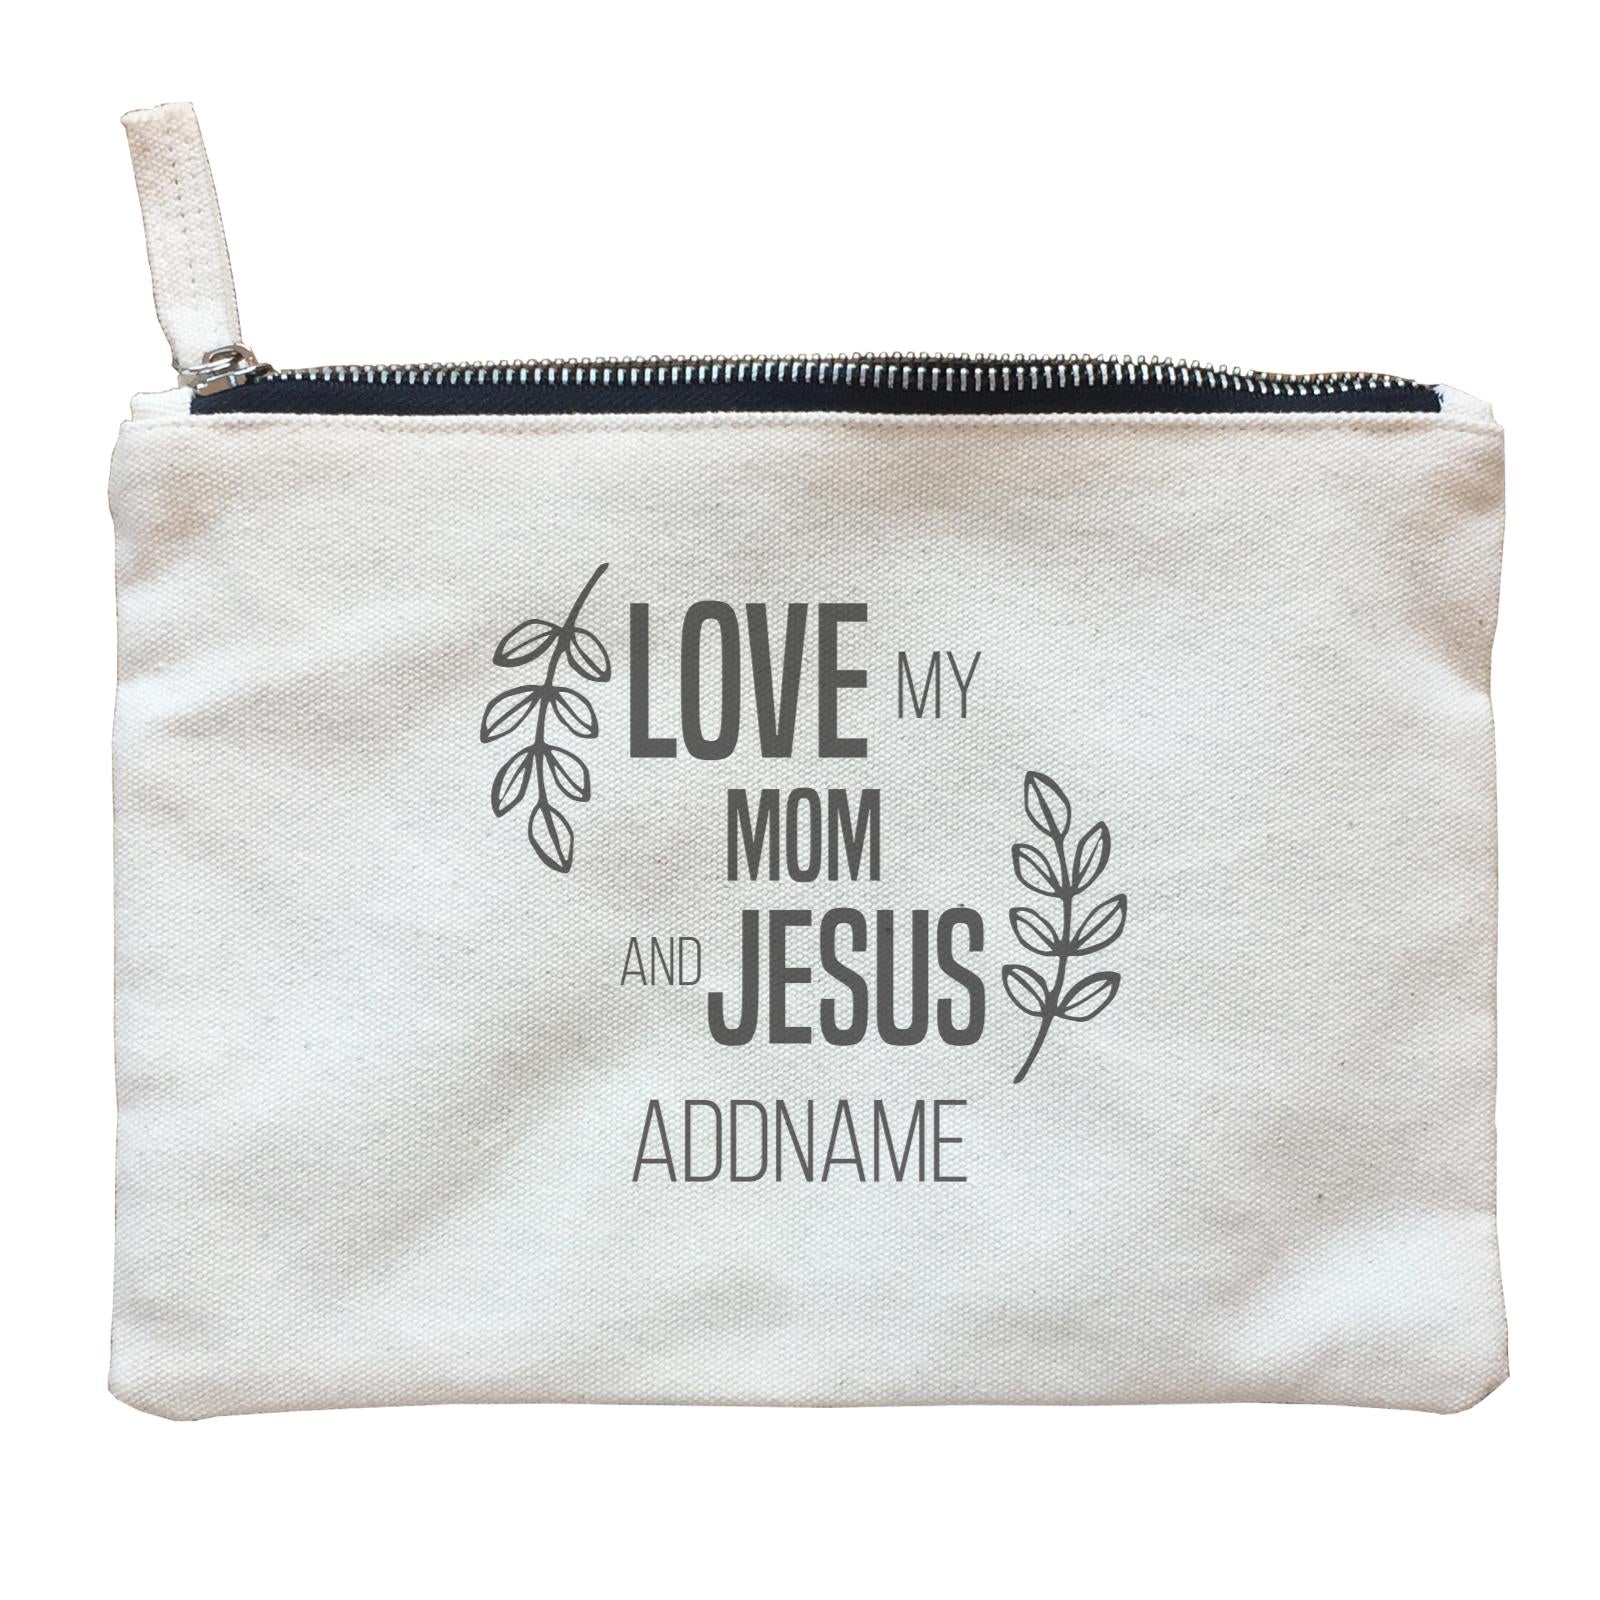 Christian Series Love My Mom And Jesus Addname Zipper Pouch